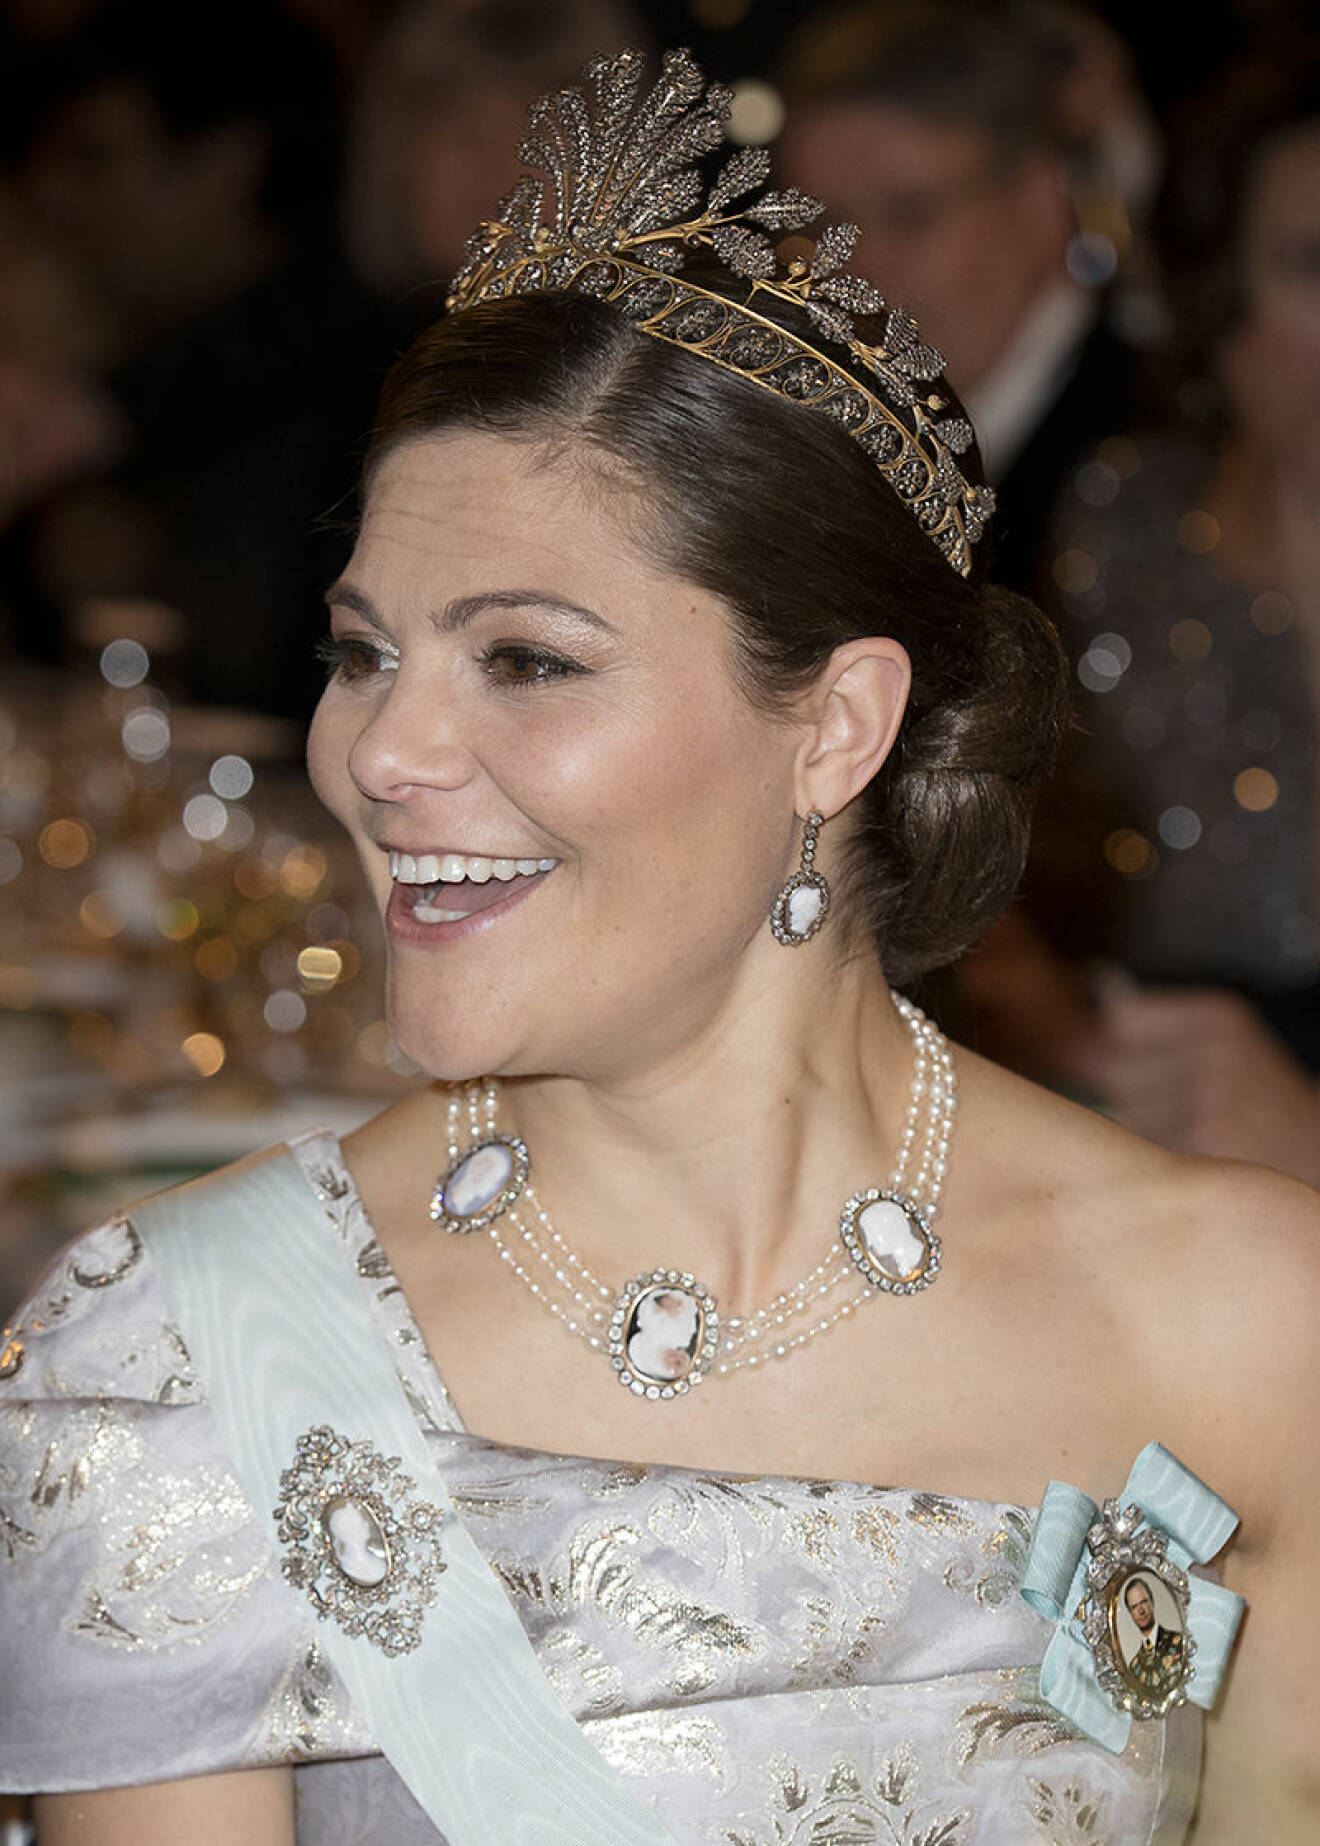 6850392 STOCKHOLM 2016-12-10. The Nobel Prize 2016. The Nobel Banquet held in the Blue Hall of the Stockholm City Hall. Picture shows: Crown Princess Victoria of Sweden. COPYRIGHT STELLA PICTURES